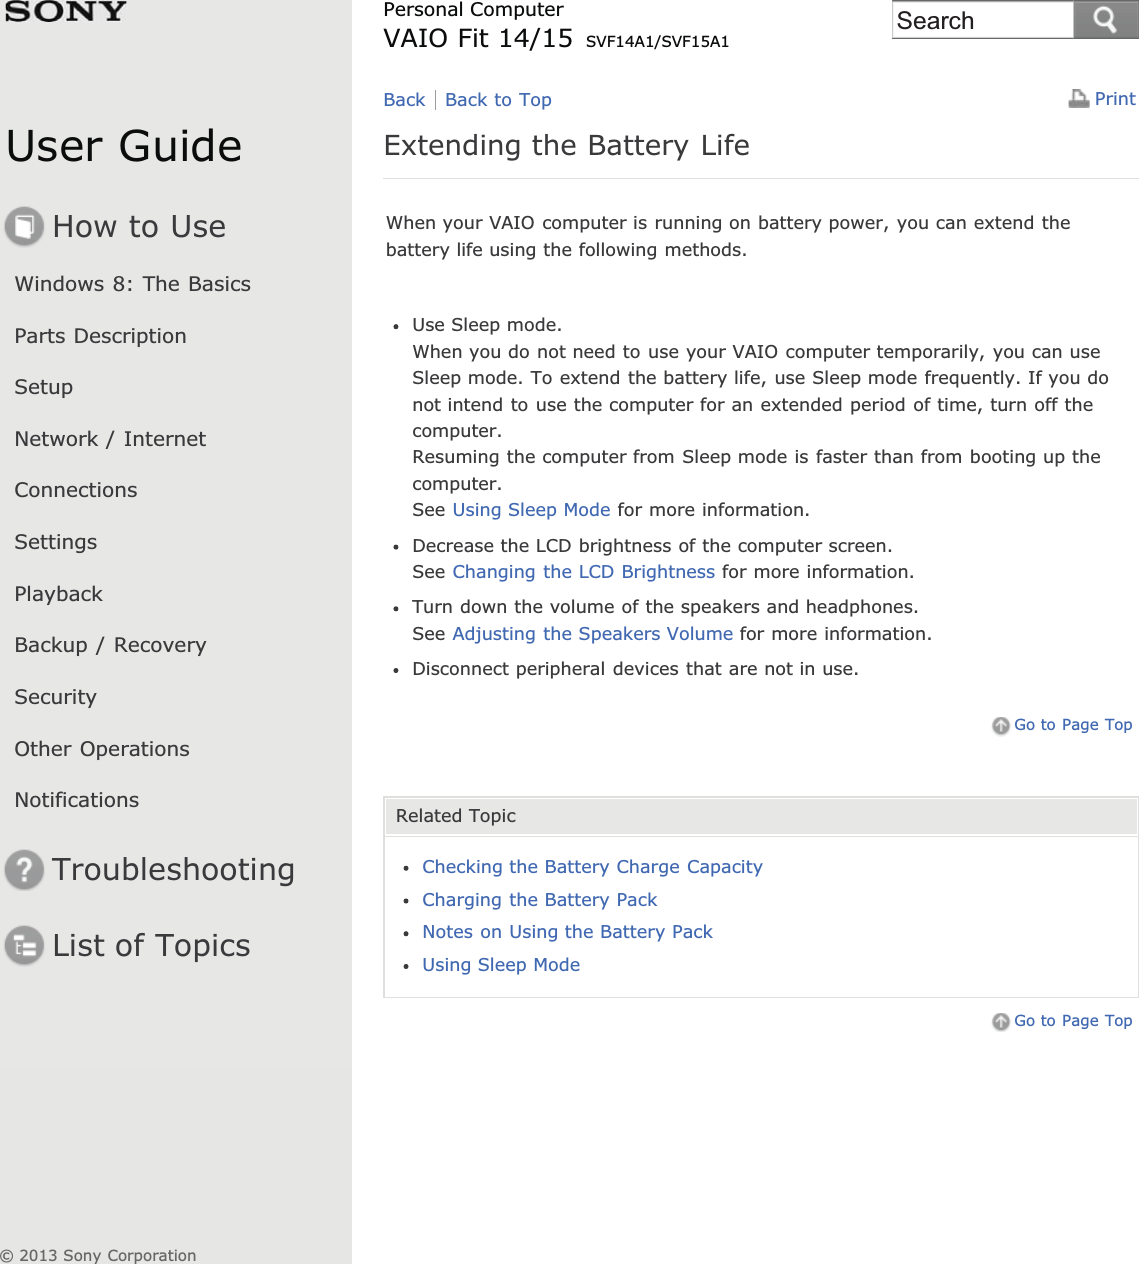 User GuideHow to UseWindows 8: The BasicsParts DescriptionSetupNetwork / InternetConnectionsSettingsPlaybackBackup / RecoverySecurityOther OperationsNotificationsTroubleshootingList of TopicsPrintPersonal ComputerVAIO Fit 14/15 SVF14A1/SVF15A1Extending the Battery LifeWhen your VAIO computer is running on battery power, you can extend thebattery life using the following methods.Use Sleep mode.When you do not need to use your VAIO computer temporarily, you can useSleep mode. To extend the battery life, use Sleep mode frequently. If you donot intend to use the computer for an extended period of time, turn off thecomputer.Resuming the computer from Sleep mode is faster than from booting up thecomputer.See Using Sleep Mode for more information.Decrease the LCD brightness of the computer screen.See Changing the LCD Brightness for more information.Turn down the volume of the speakers and headphones.See Adjusting the Speakers Volume for more information.Disconnect peripheral devices that are not in use.Go to Page TopRelated TopicChecking the Battery Charge CapacityCharging the Battery PackNotes on Using the Battery PackUsing Sleep ModeGo to Page TopBack Back to Top© 2013 Sony CorporationSearch